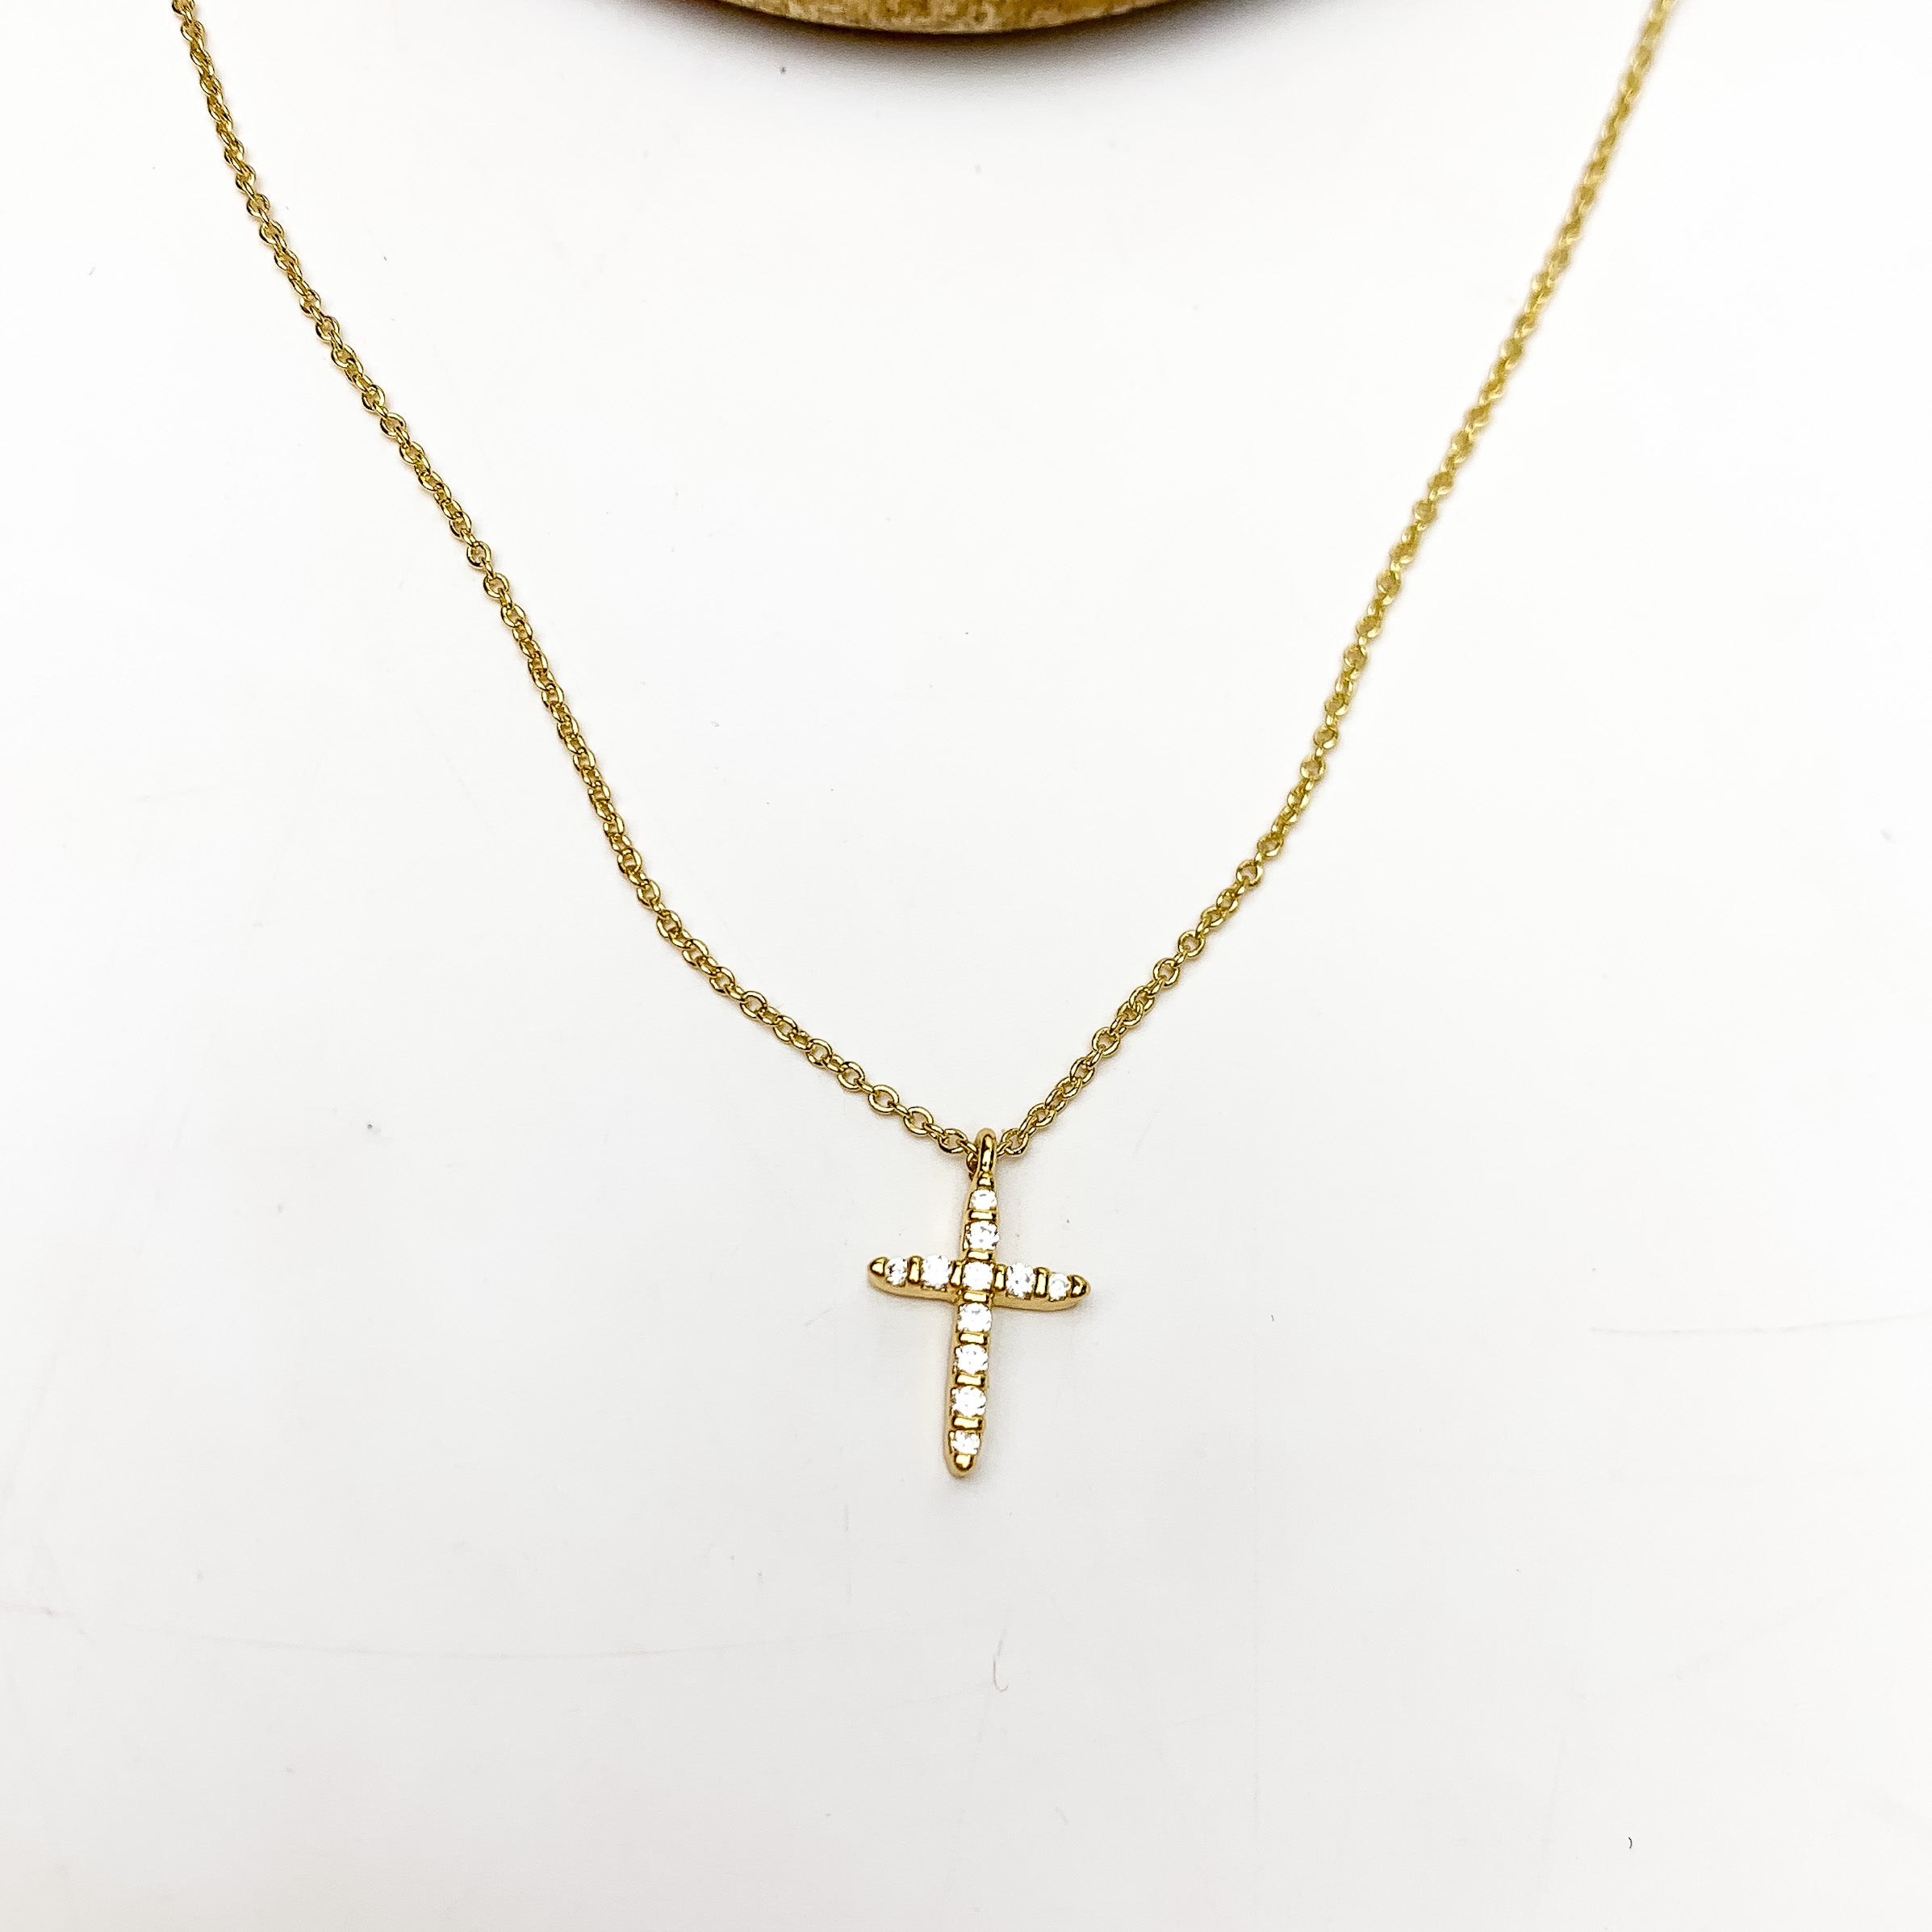 Gold Tone Glory Chain Necklace With Clear Crystal Cross